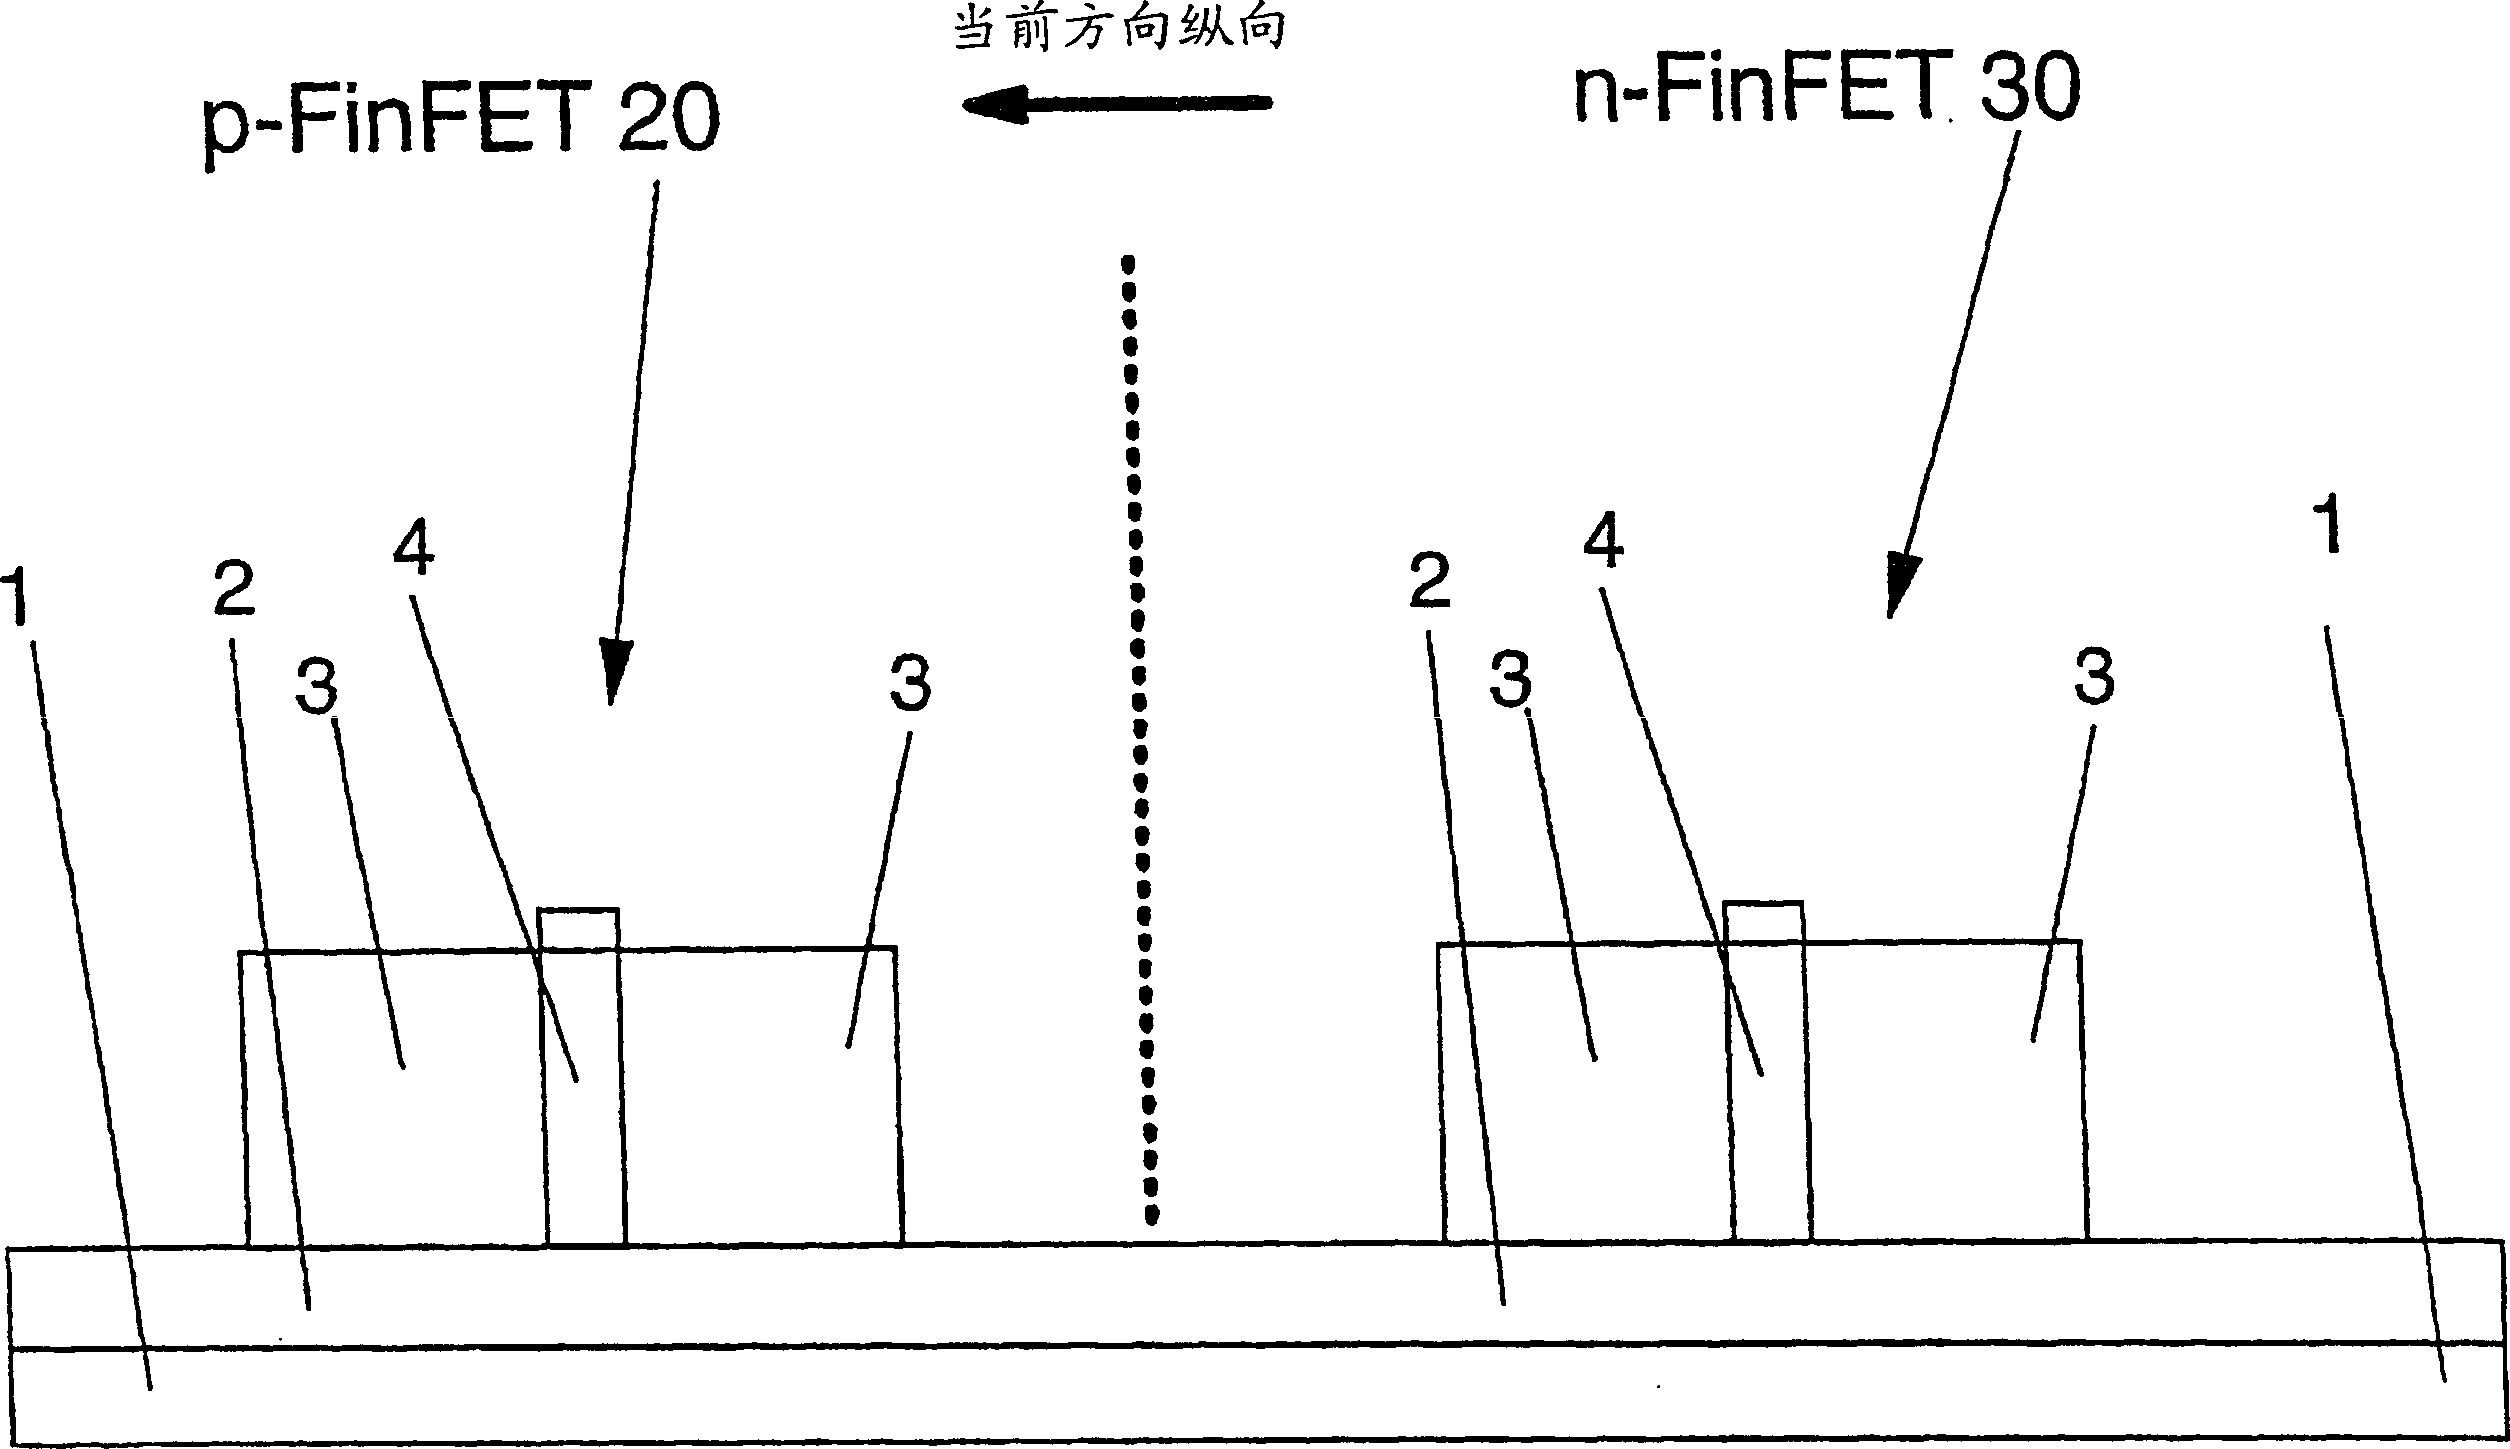 Strained FinFET CMOS device structures